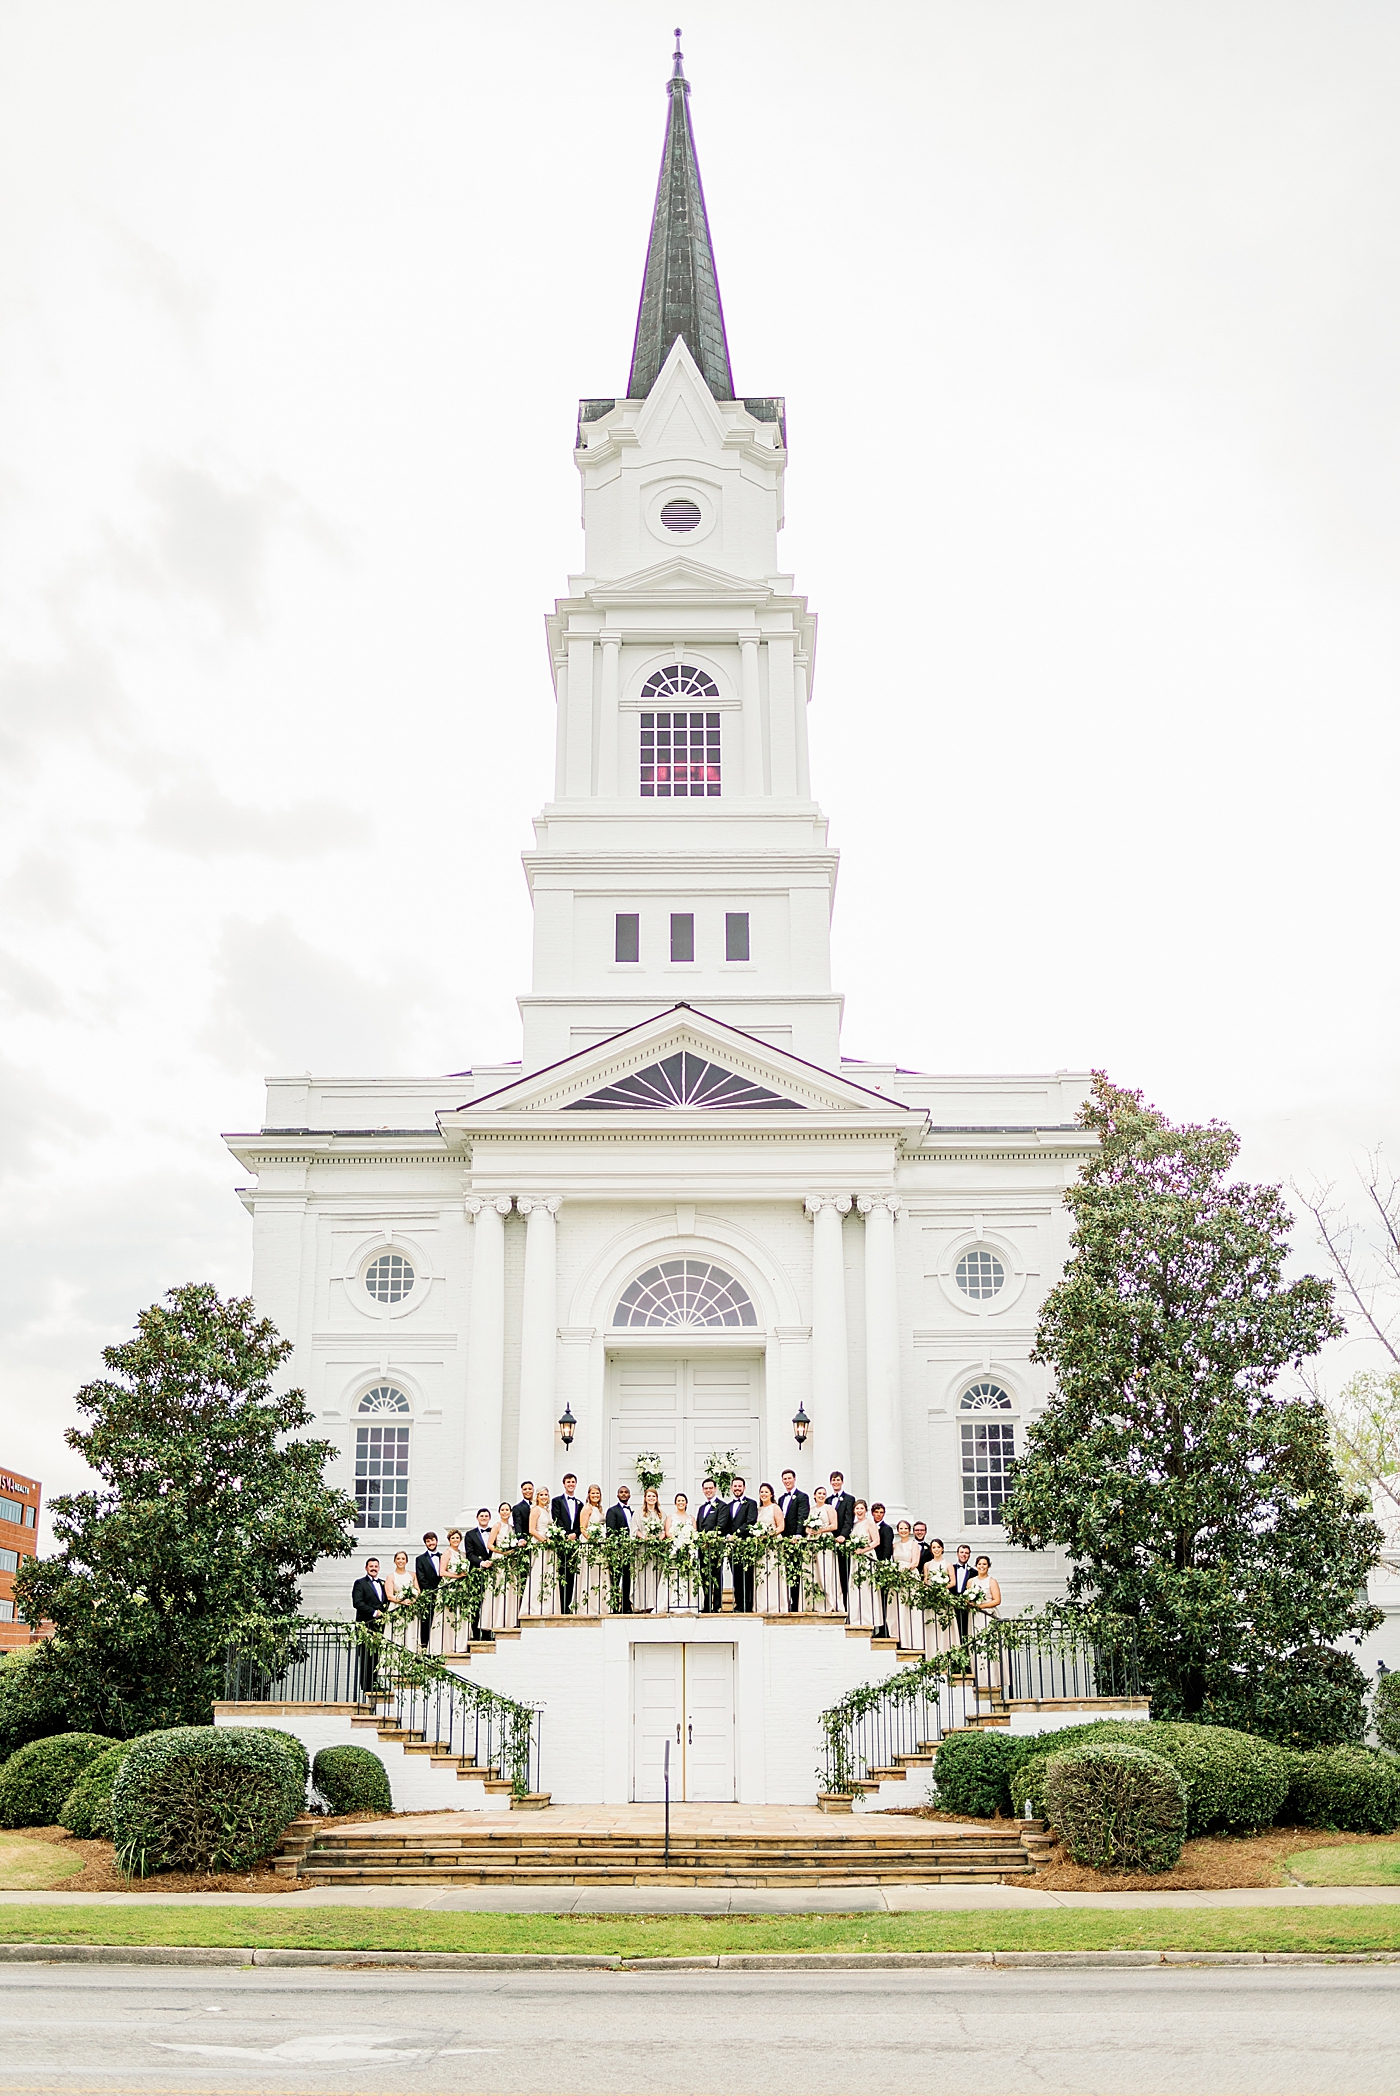 Wedding party posing on the steps of a church | Photo by Annie Laura Photography